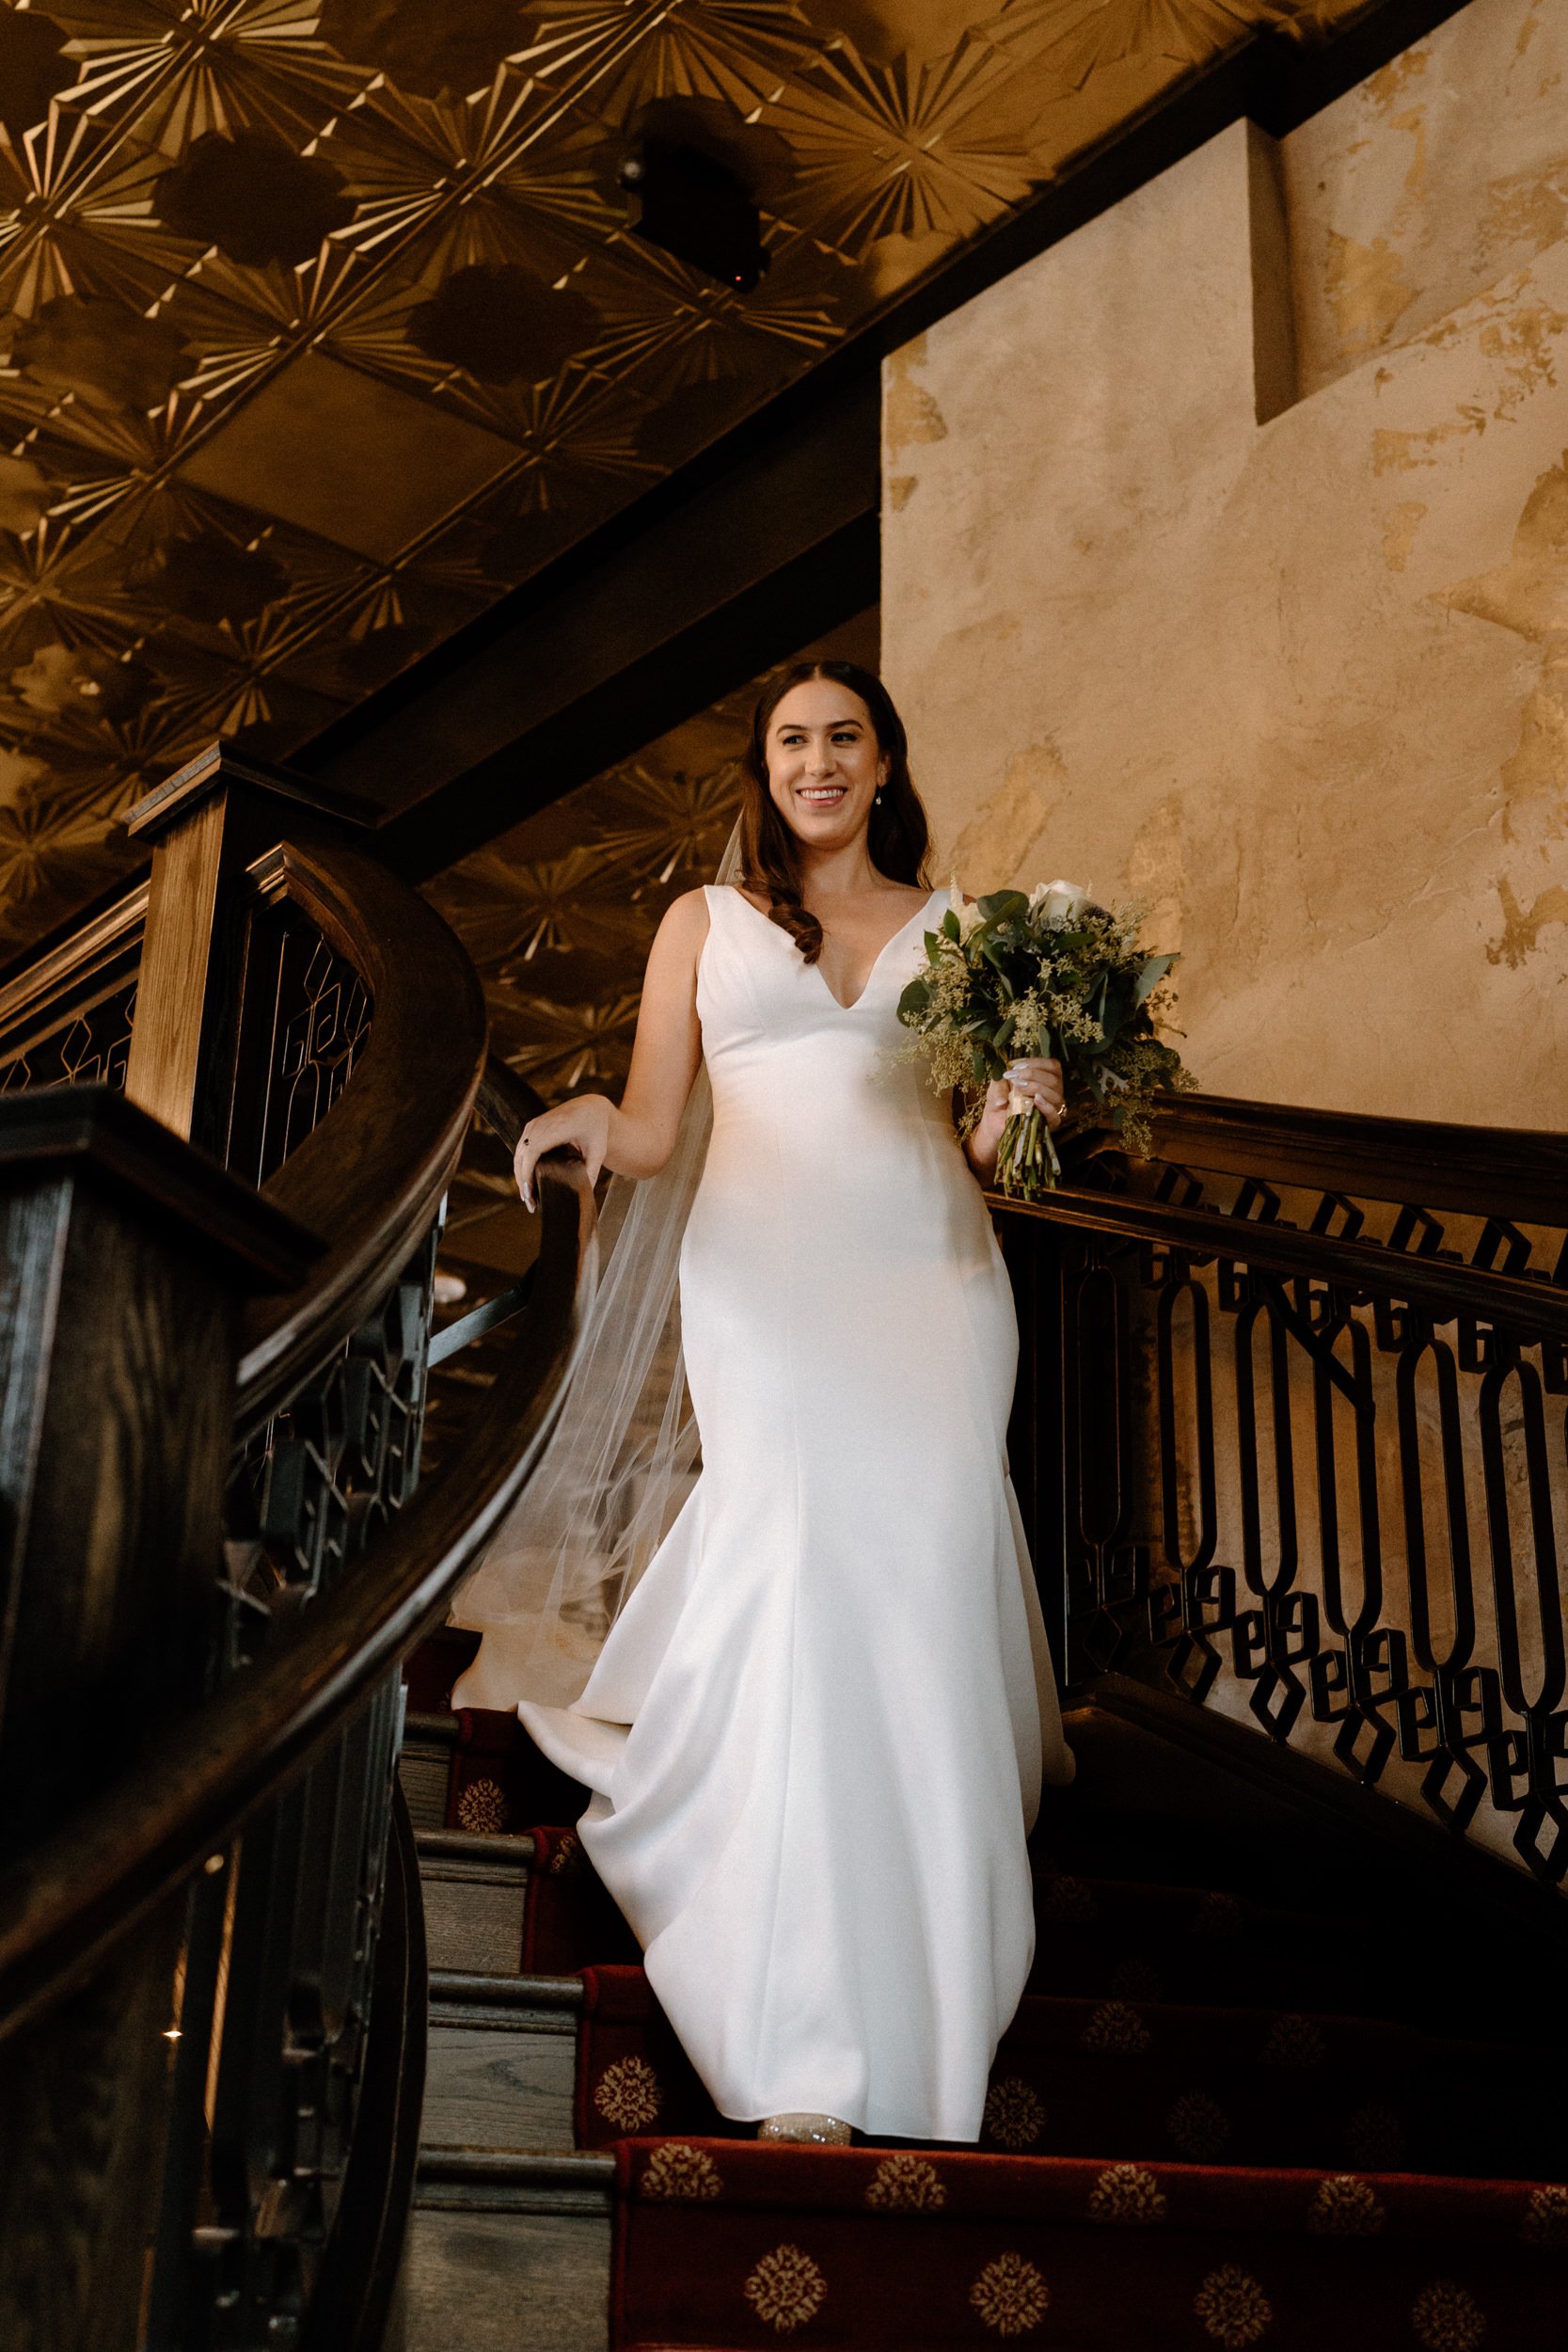 The bride walks down the staircase at Ironworks in Denver, CO